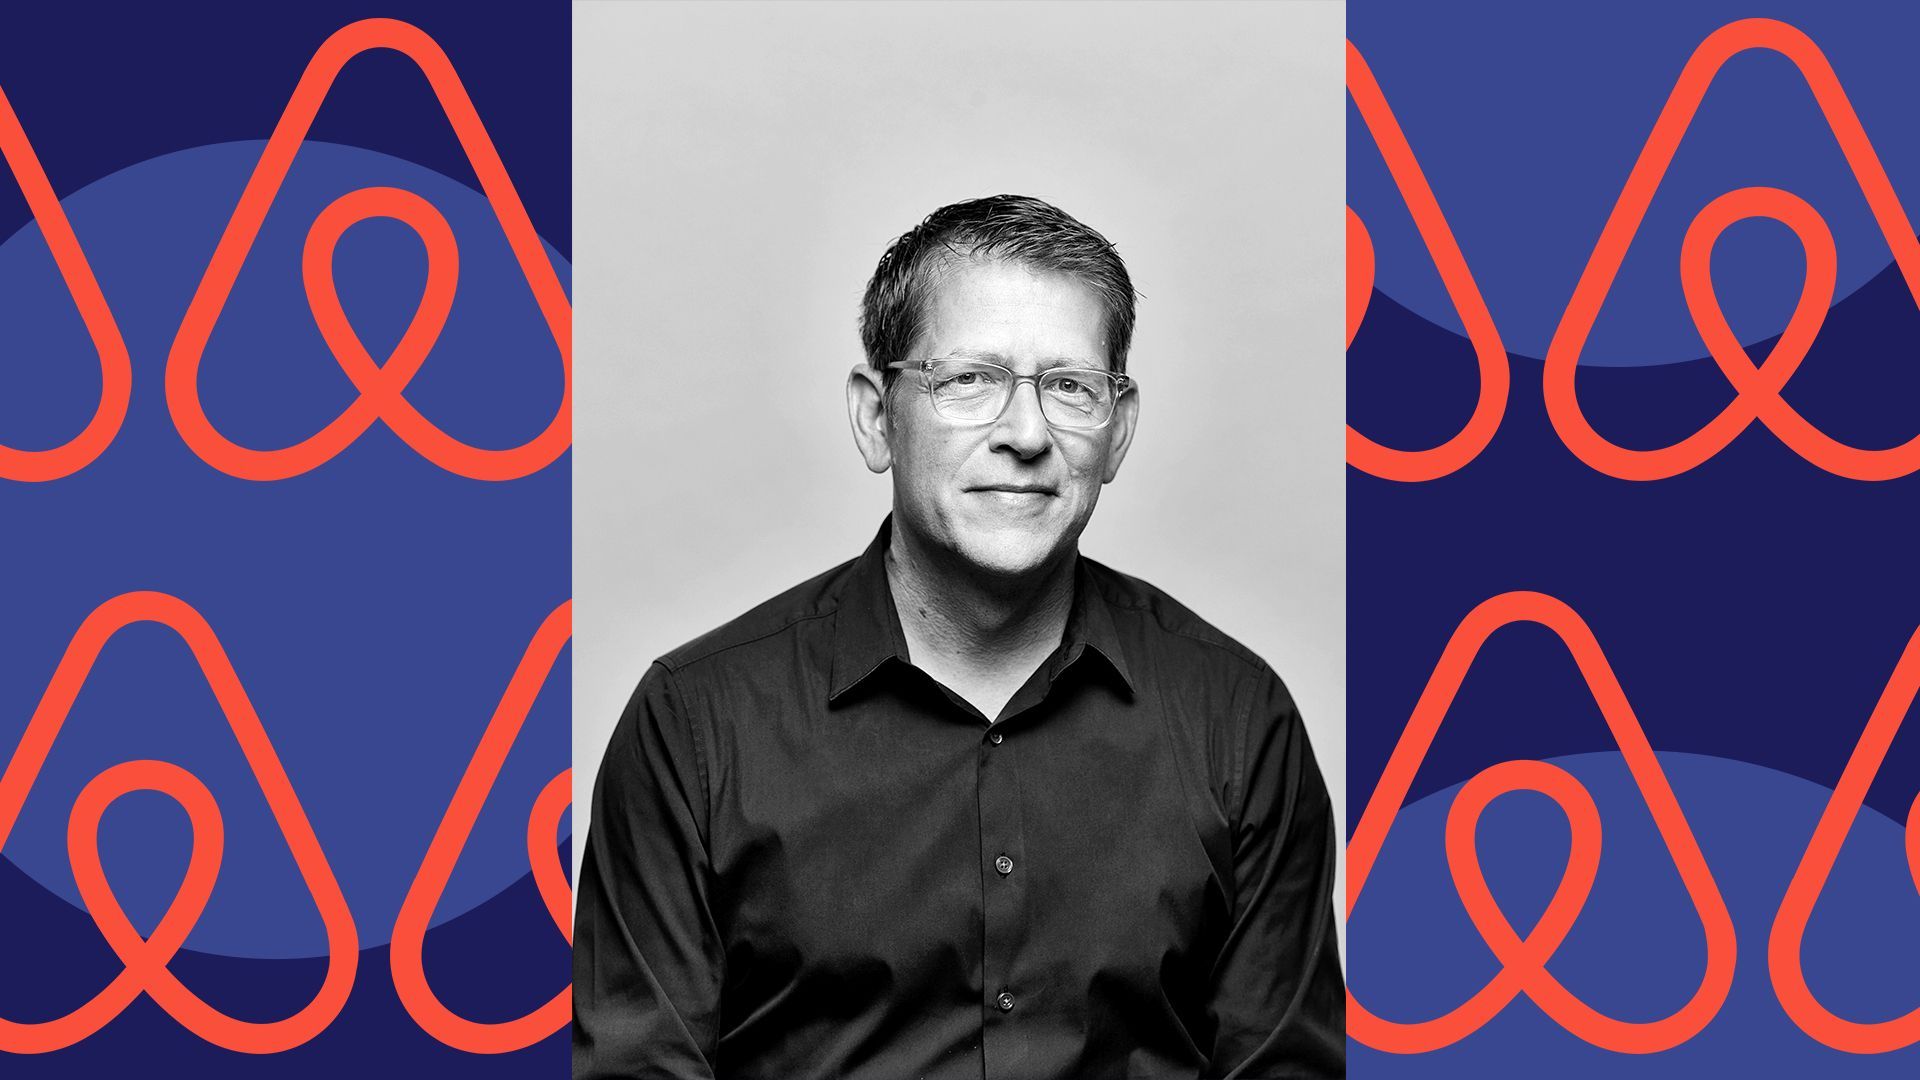 Photo illustration of Jay Carney, in front of a repeating Airbnb logo